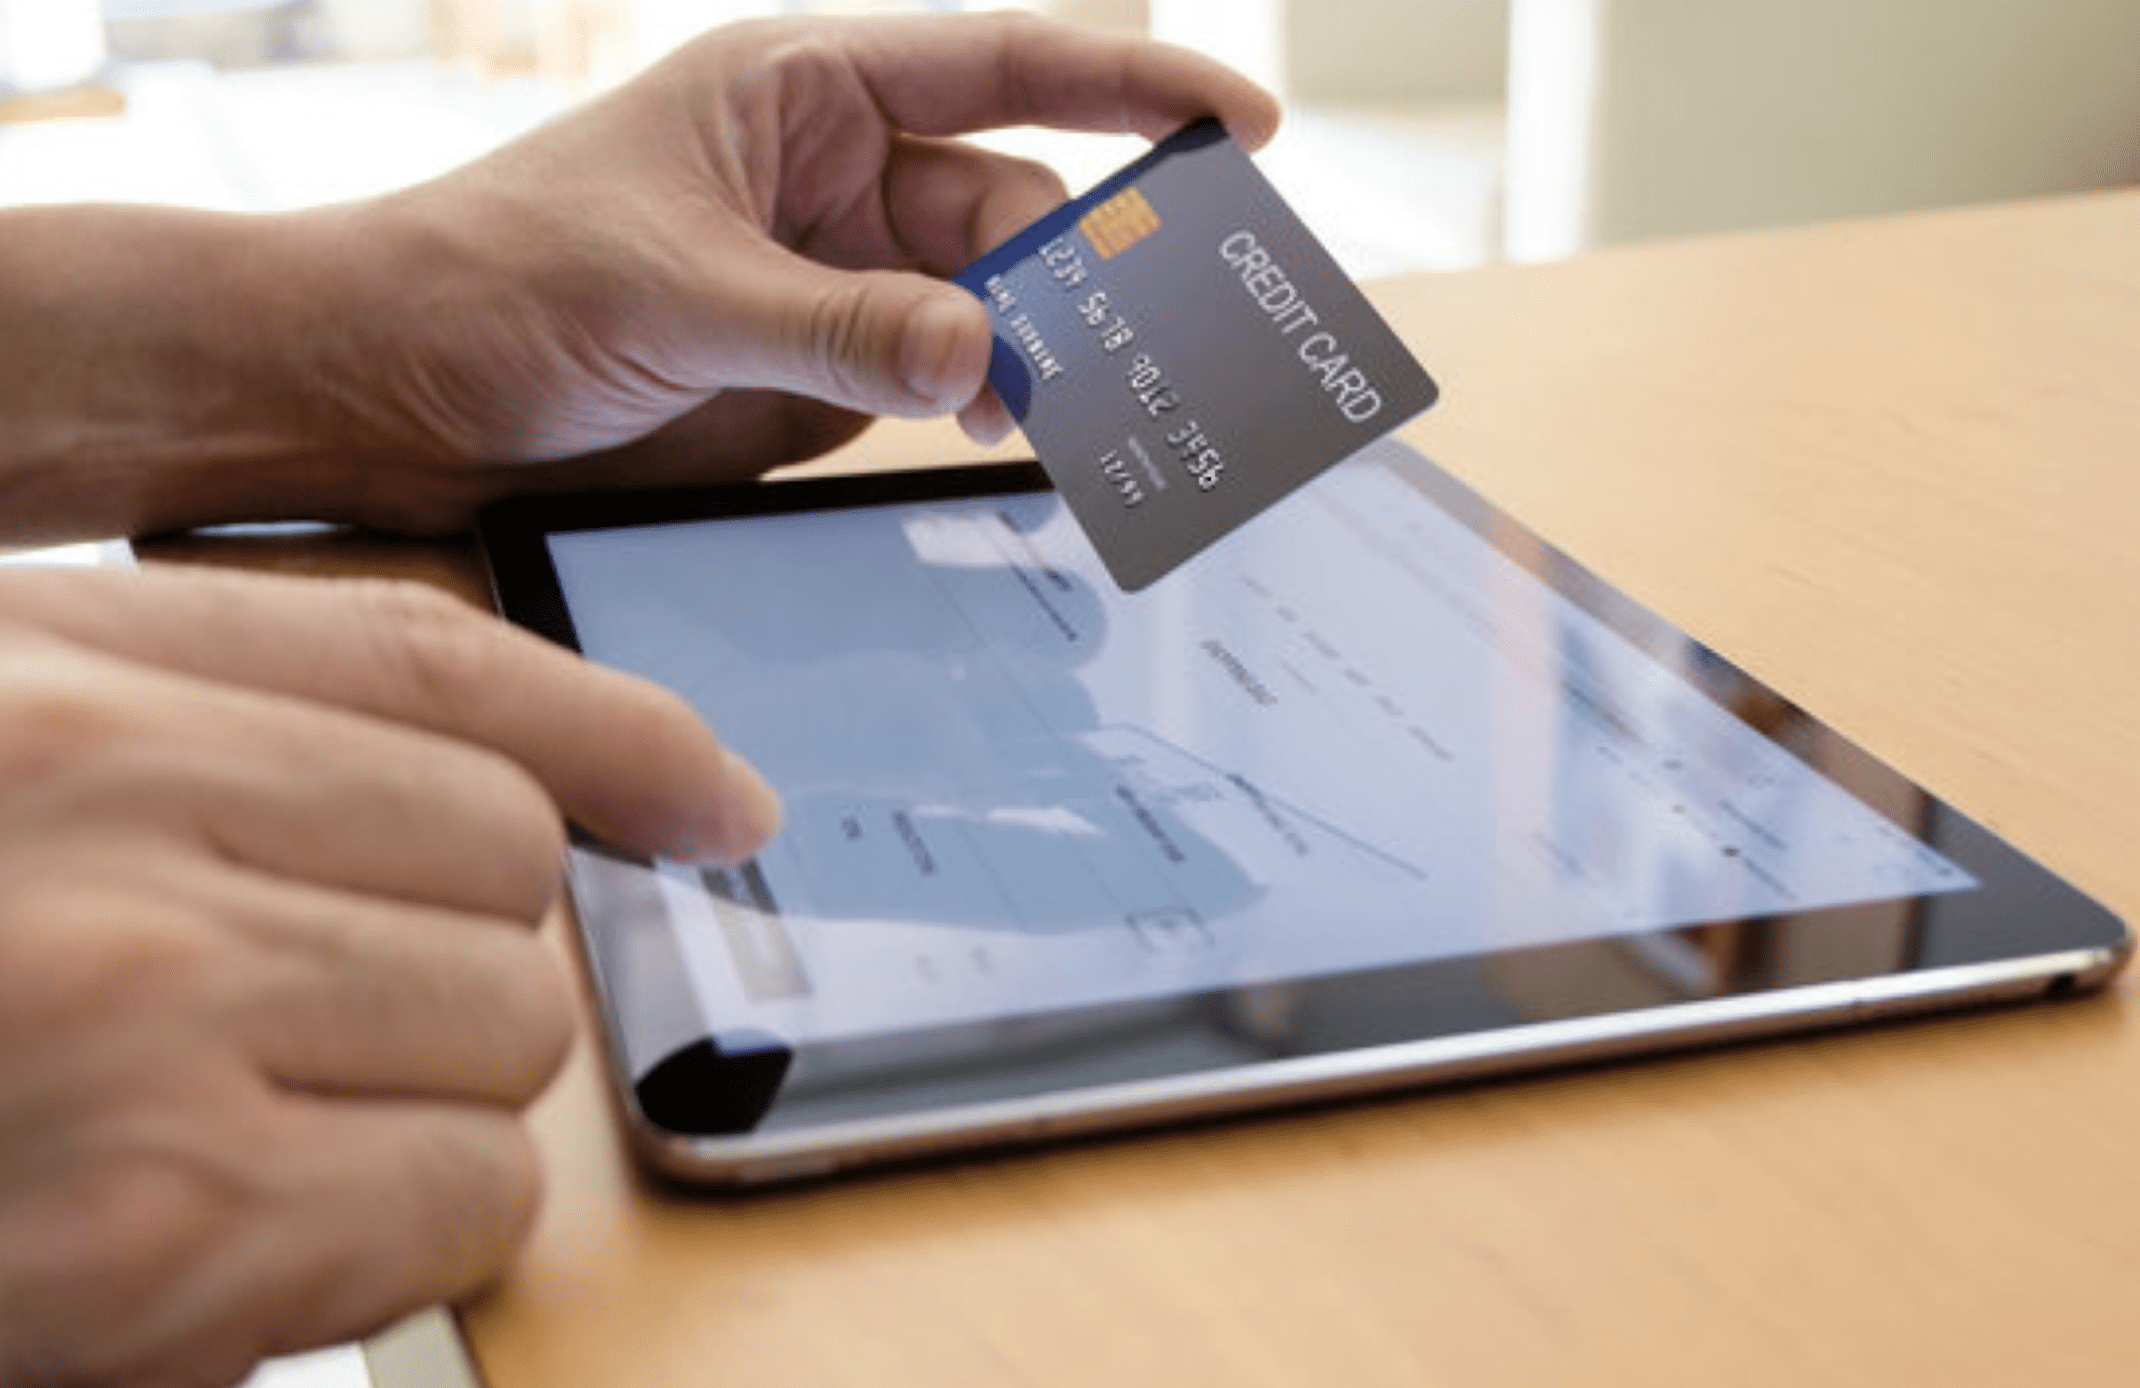 CREDIT AND DEBIT CARD PAYMENTS